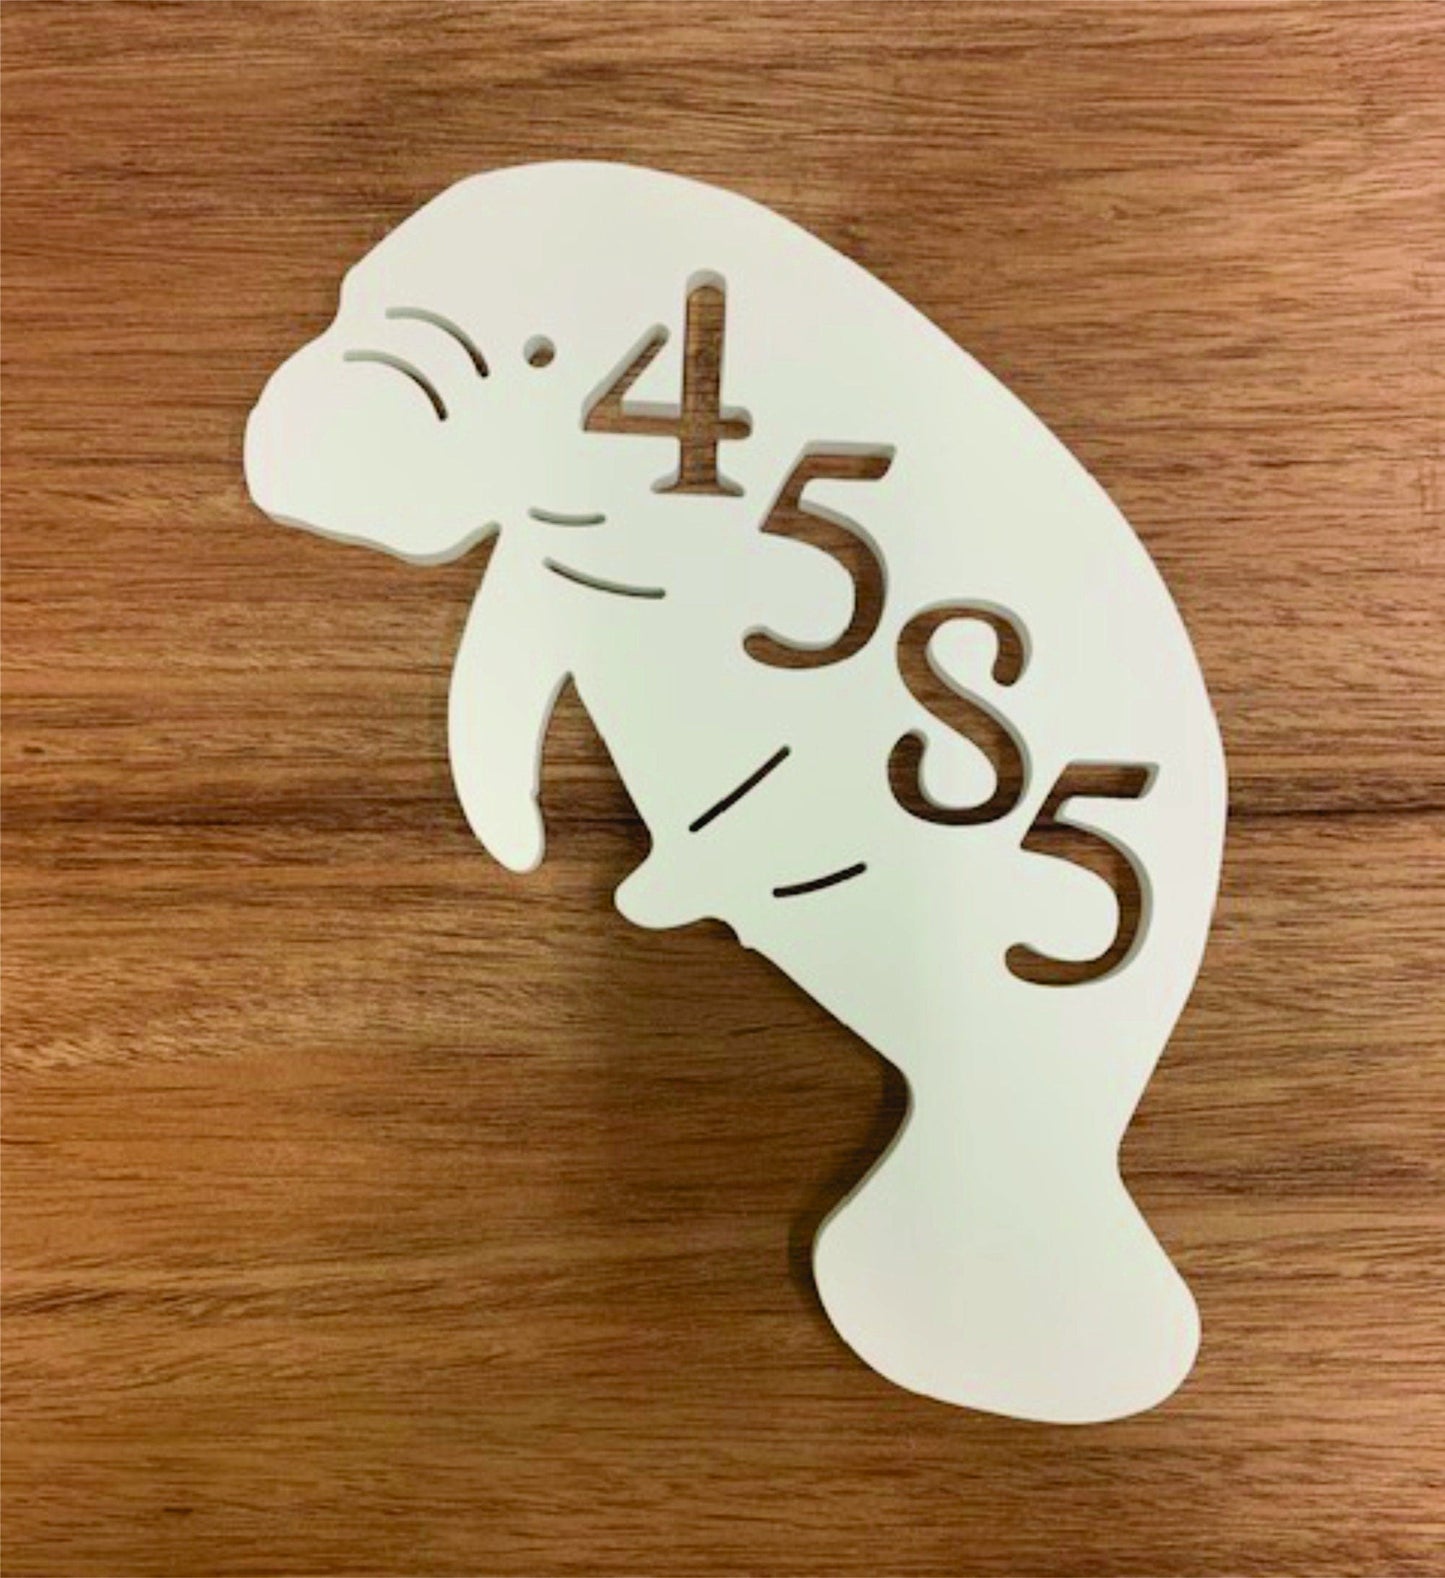 House Number Plaque - Manatee, Address Plaque, Custom, Personalized, Housewarming Gift, Tropical, Outdoor Decor, Ships Free To Mainland USA